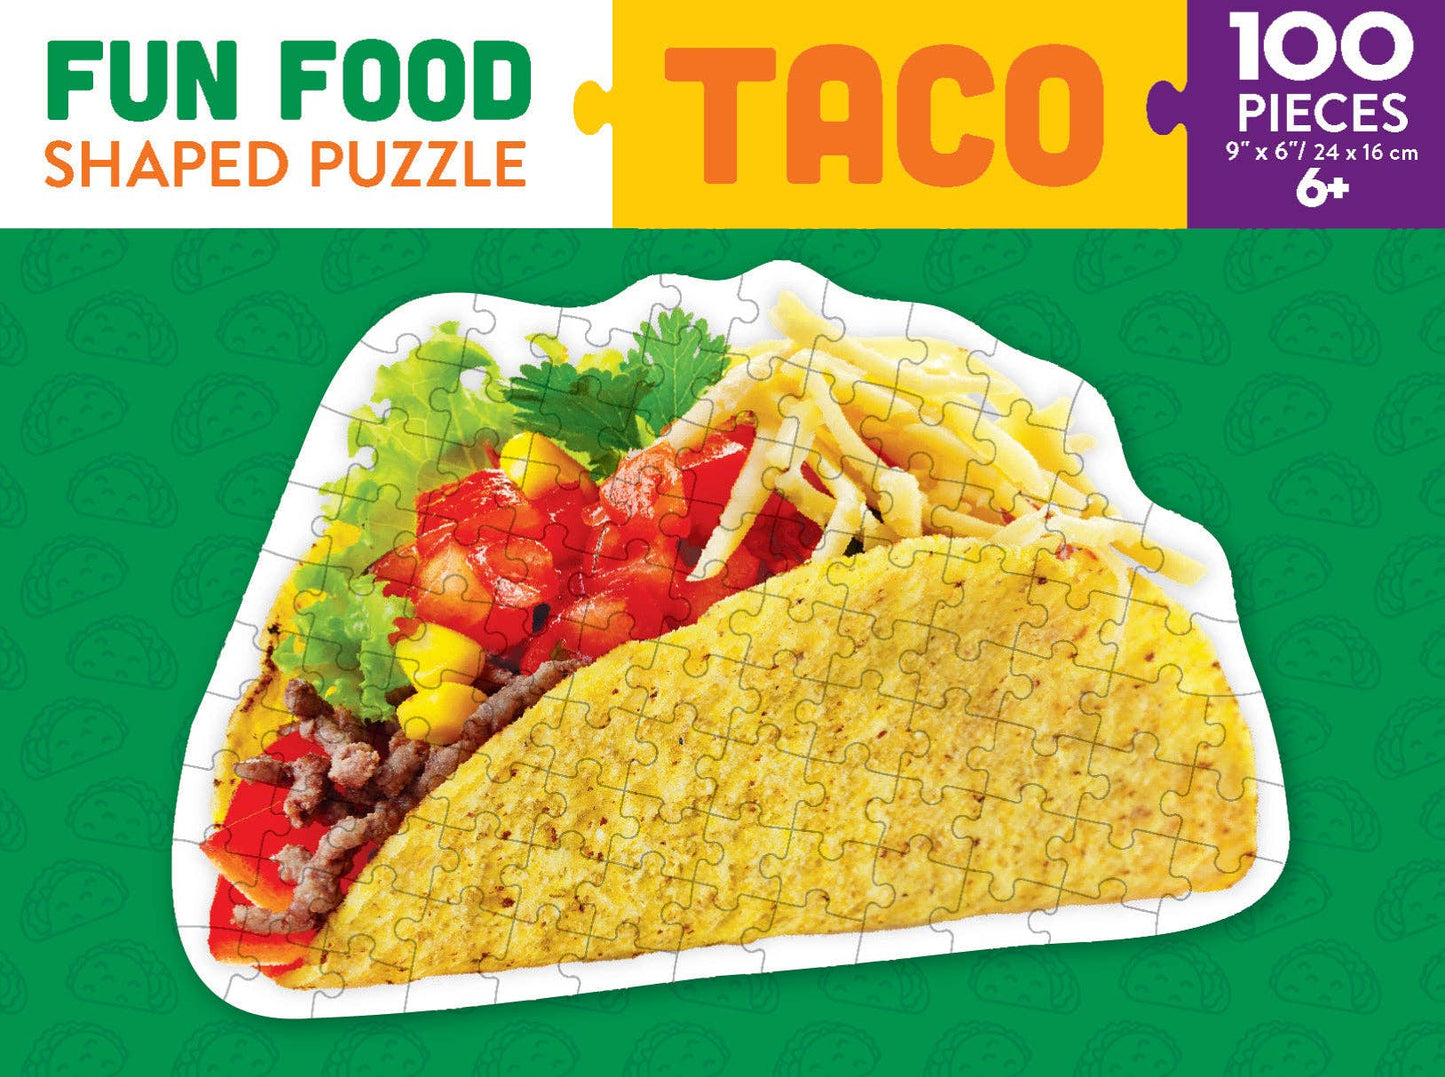 Taco 100 Piece Shaped Food Puzzle